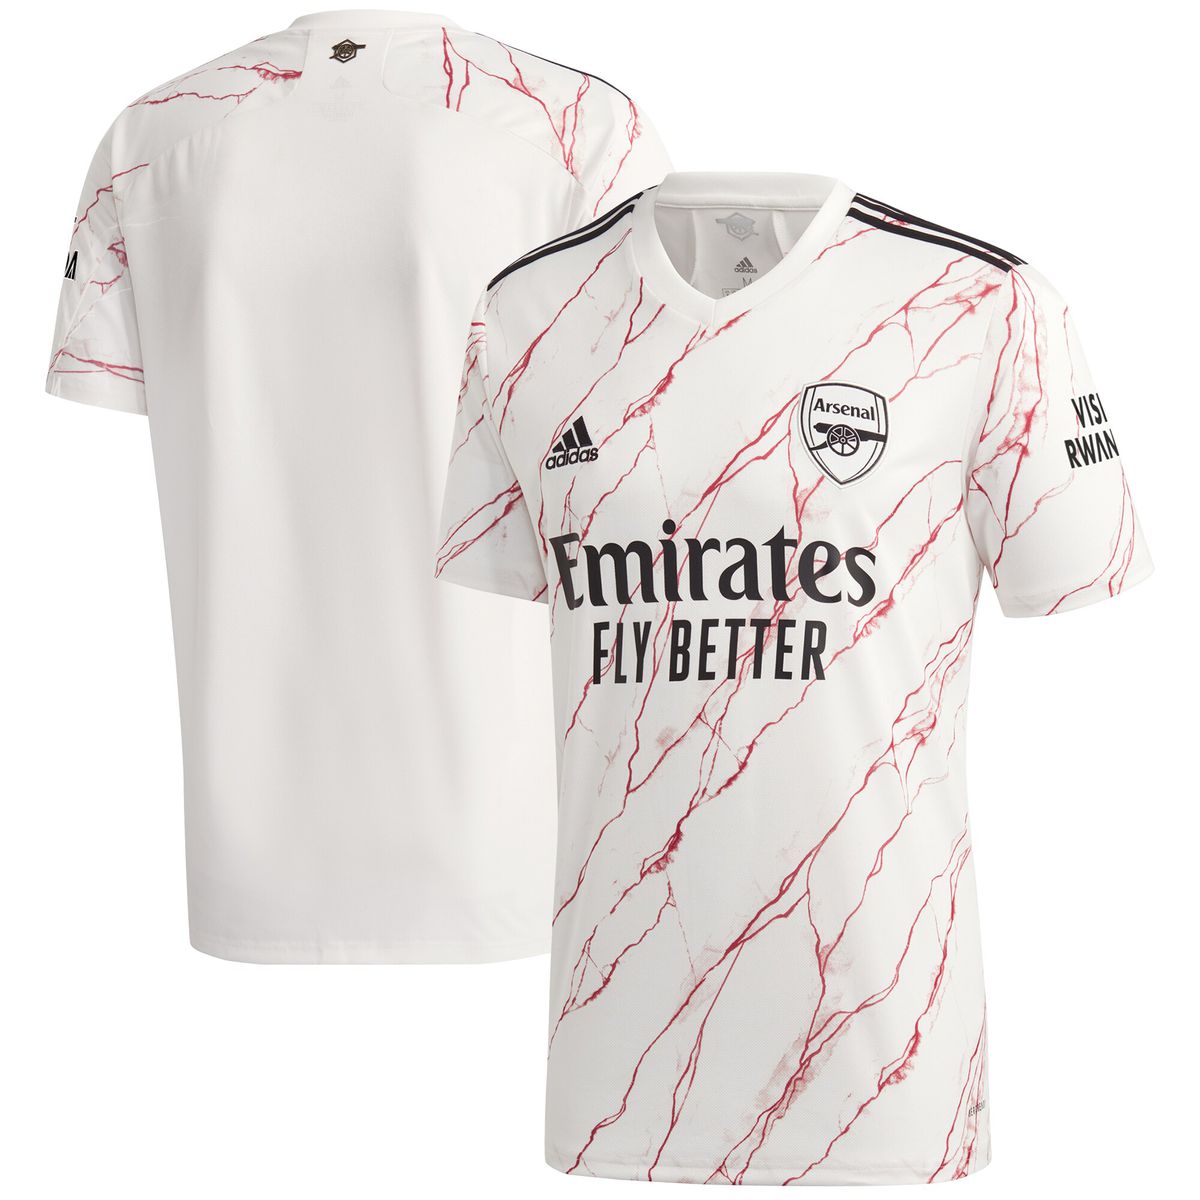 besteden Vernietigen Steil Arsenal release 2020/21 away kits with red and white marble from Adidas -  The Short Fuse